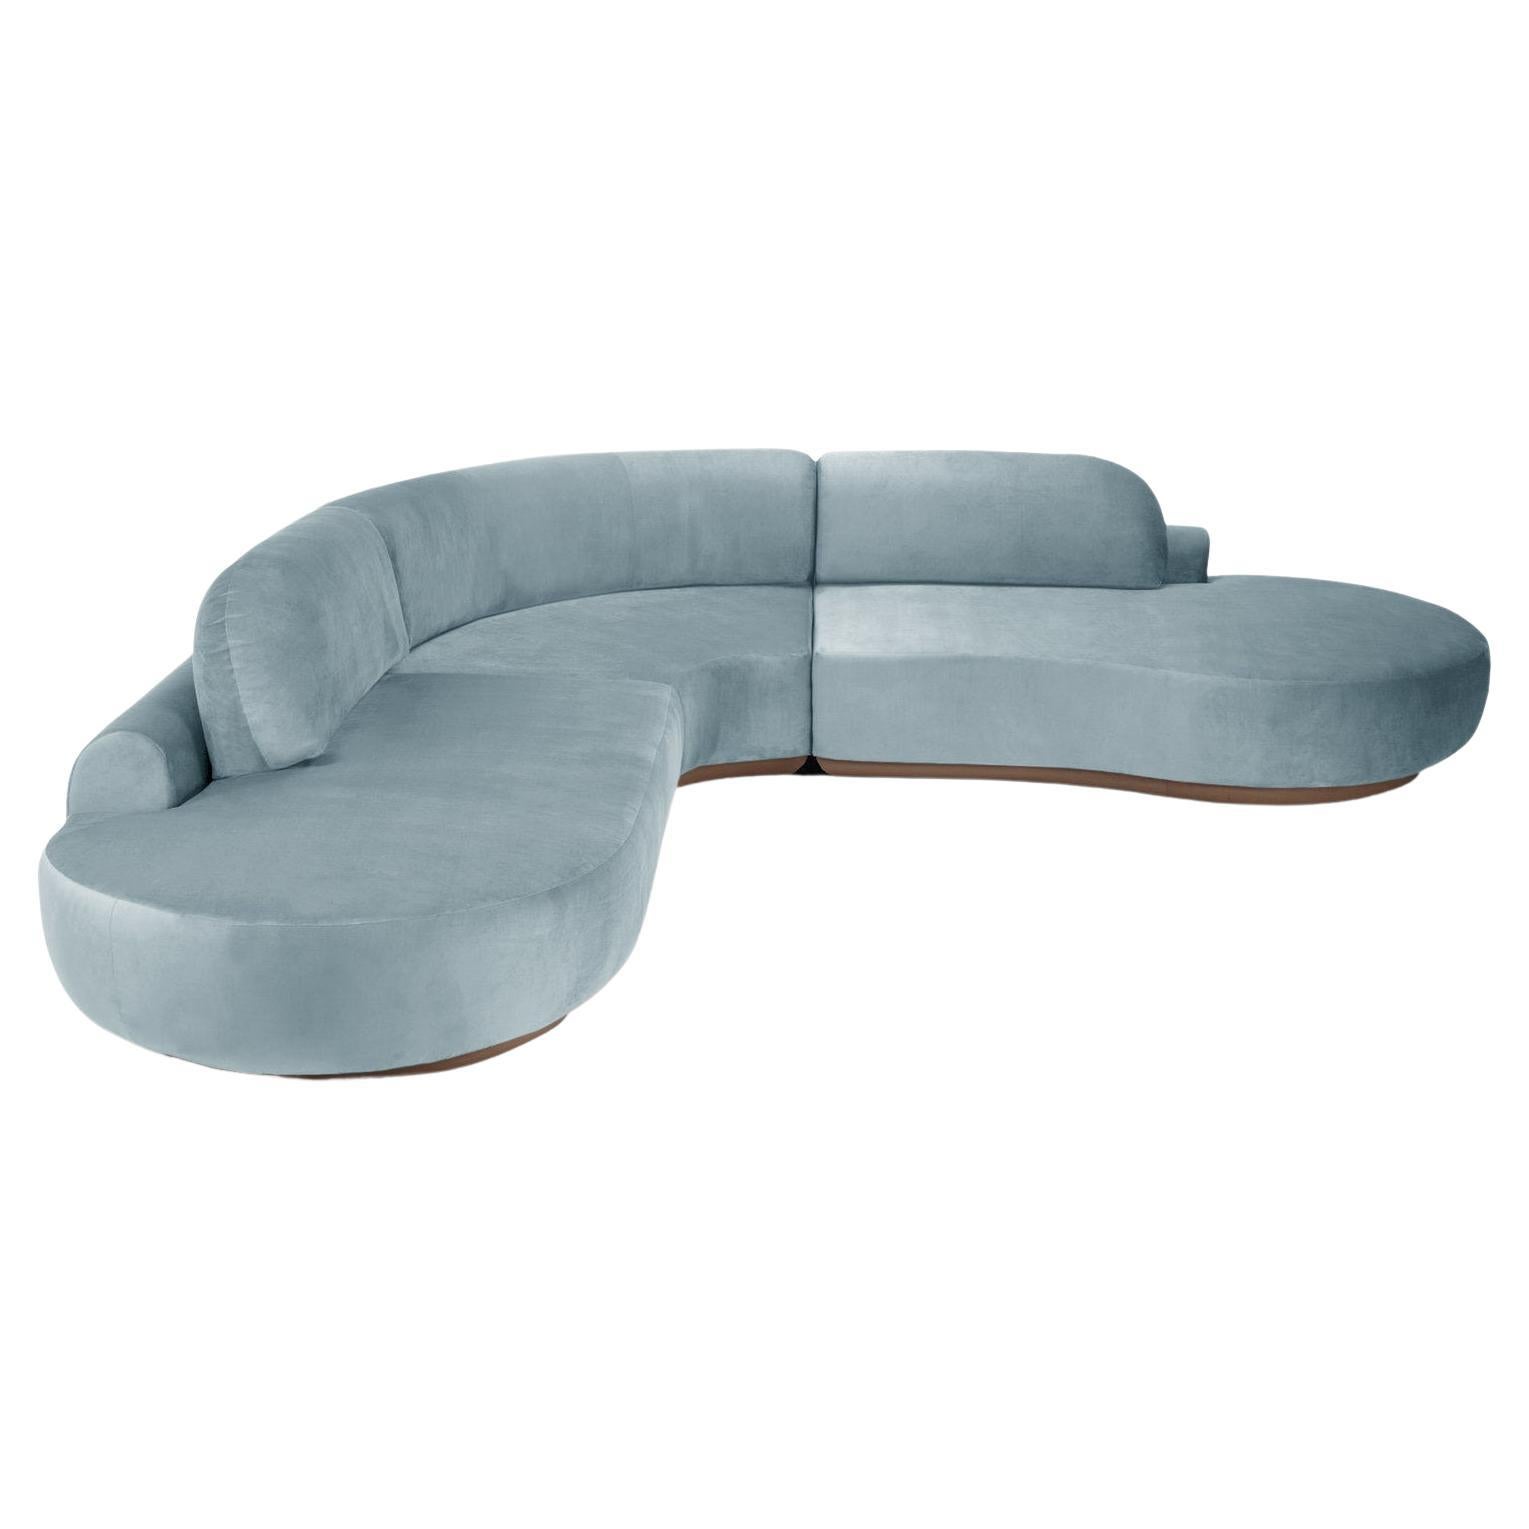 Naked Curved Sectional Sofa, 3 Piece with Wood and Paris Safira For Sale